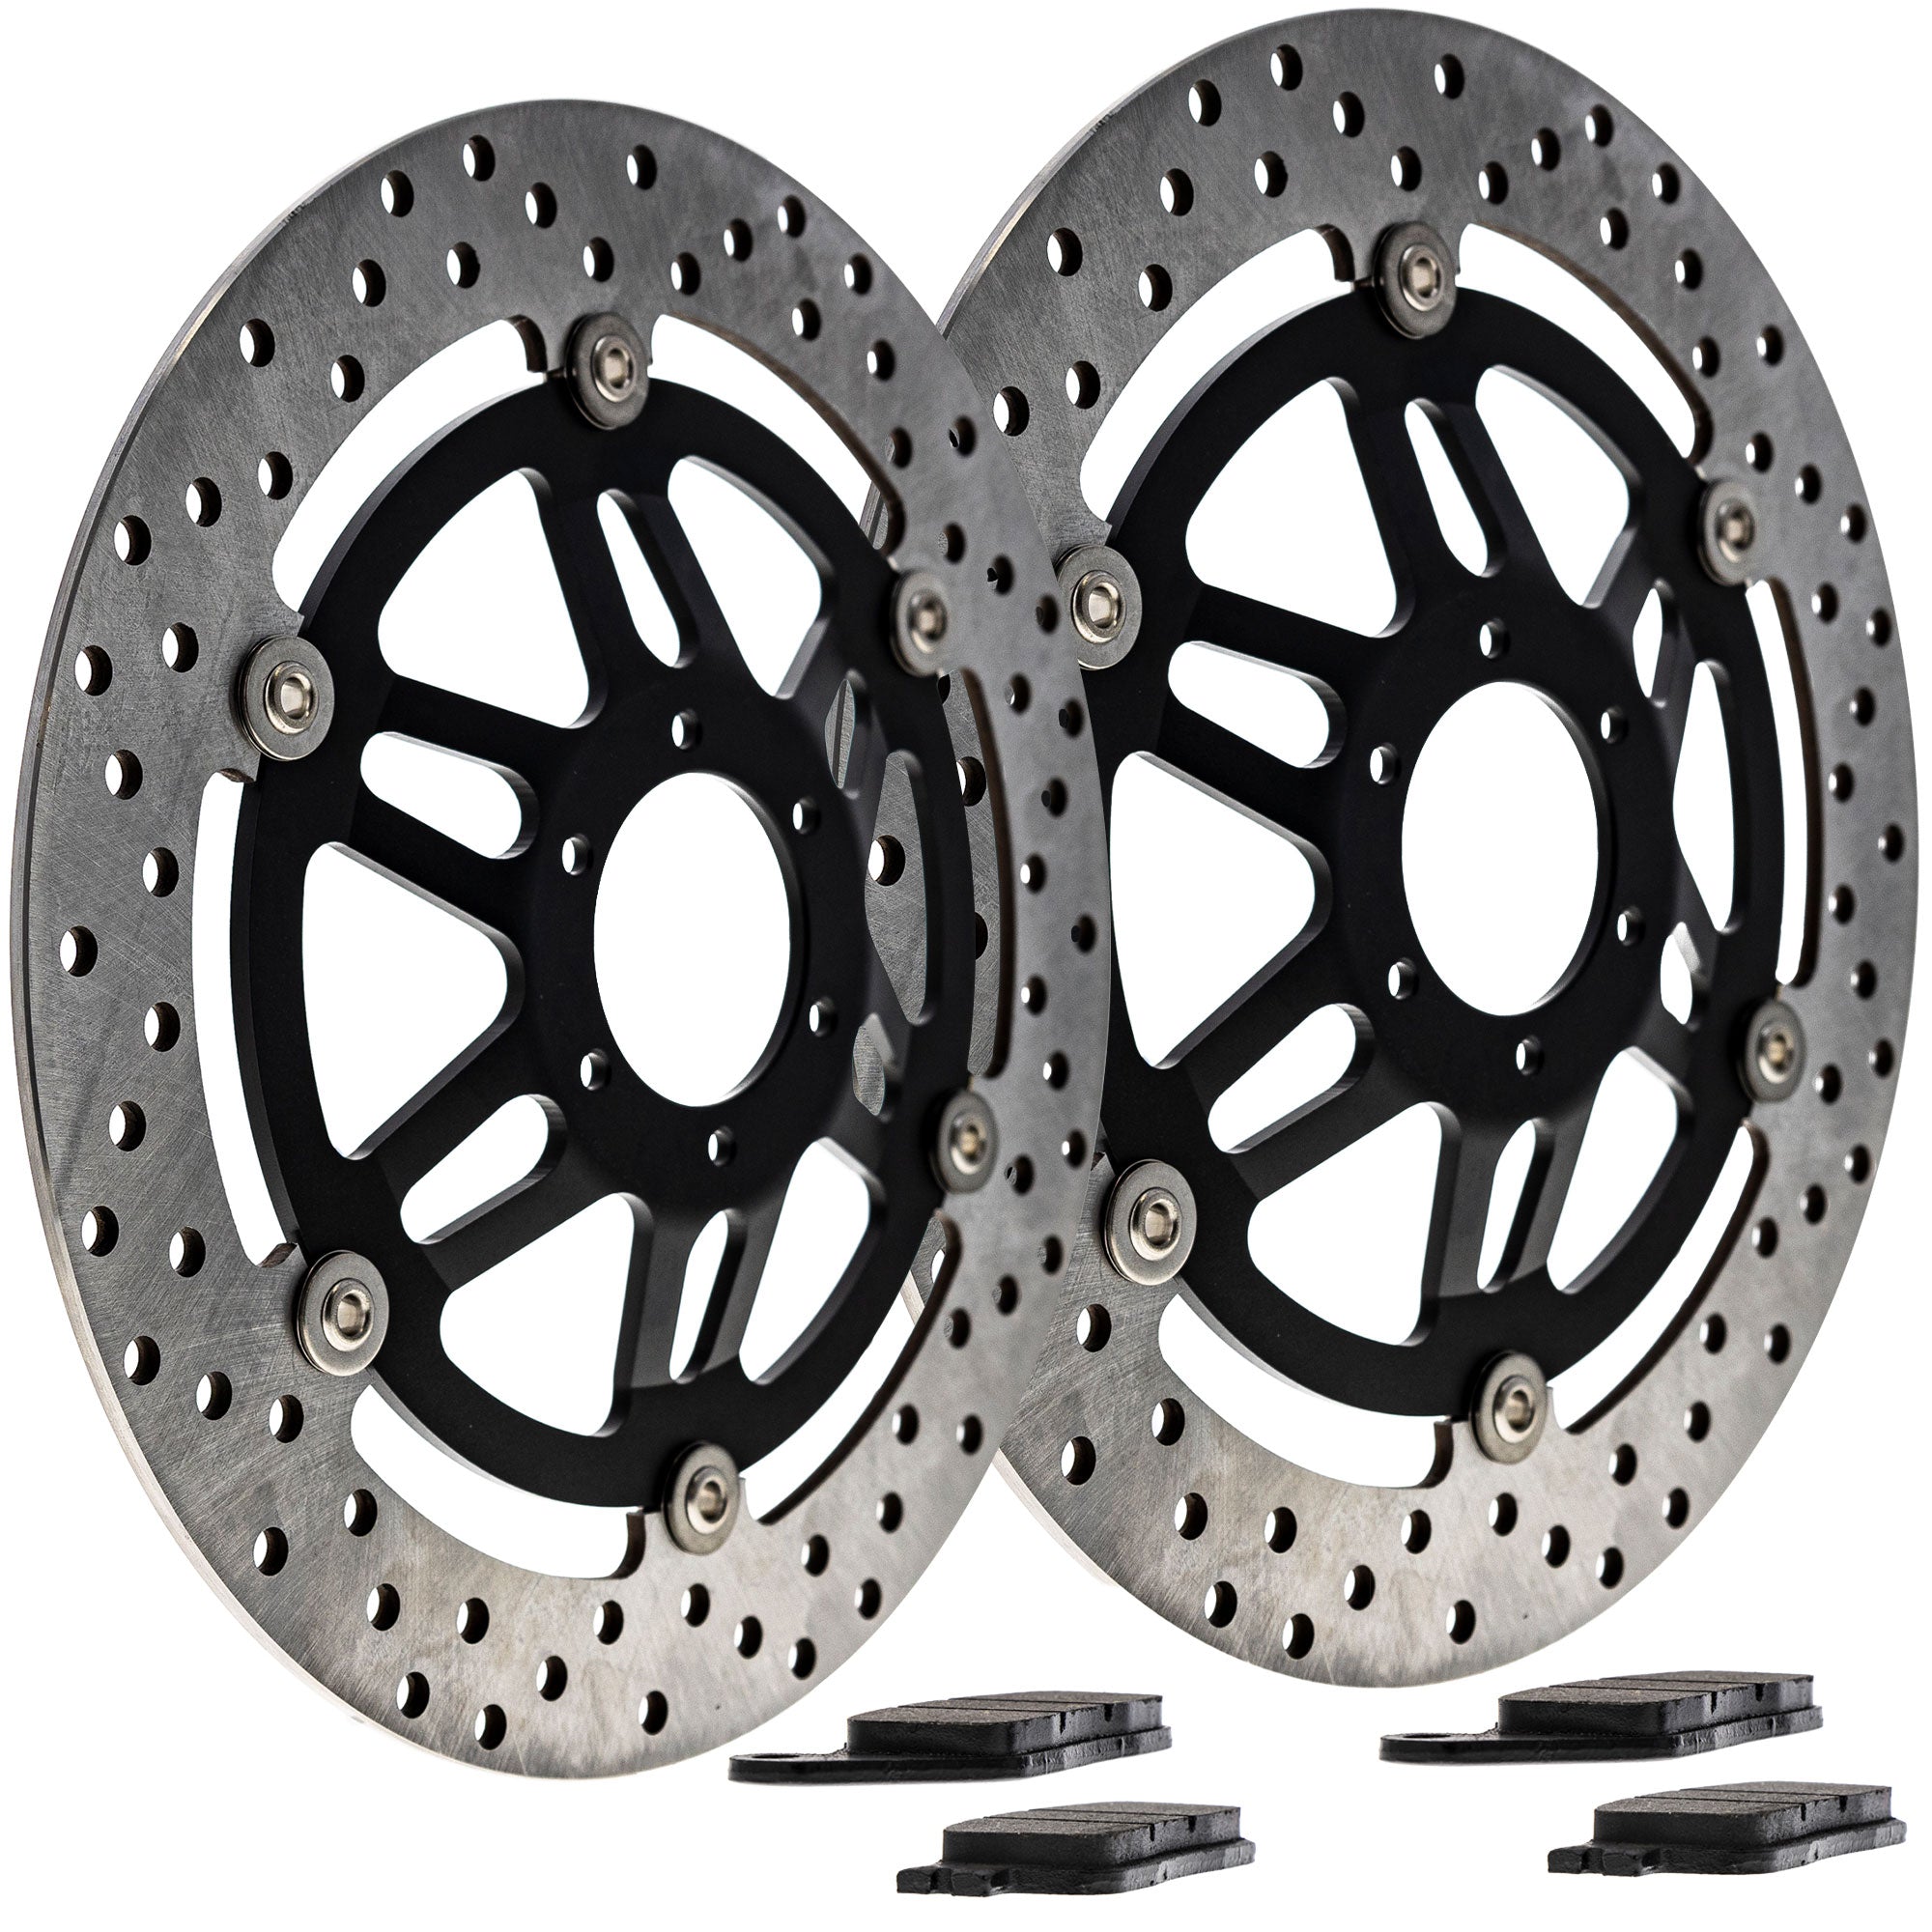 Complete Front or Rear Pad and Rotor Set for zOTHER Kawasaki CBR600SJ CBR600F3 NICHE MK1006683